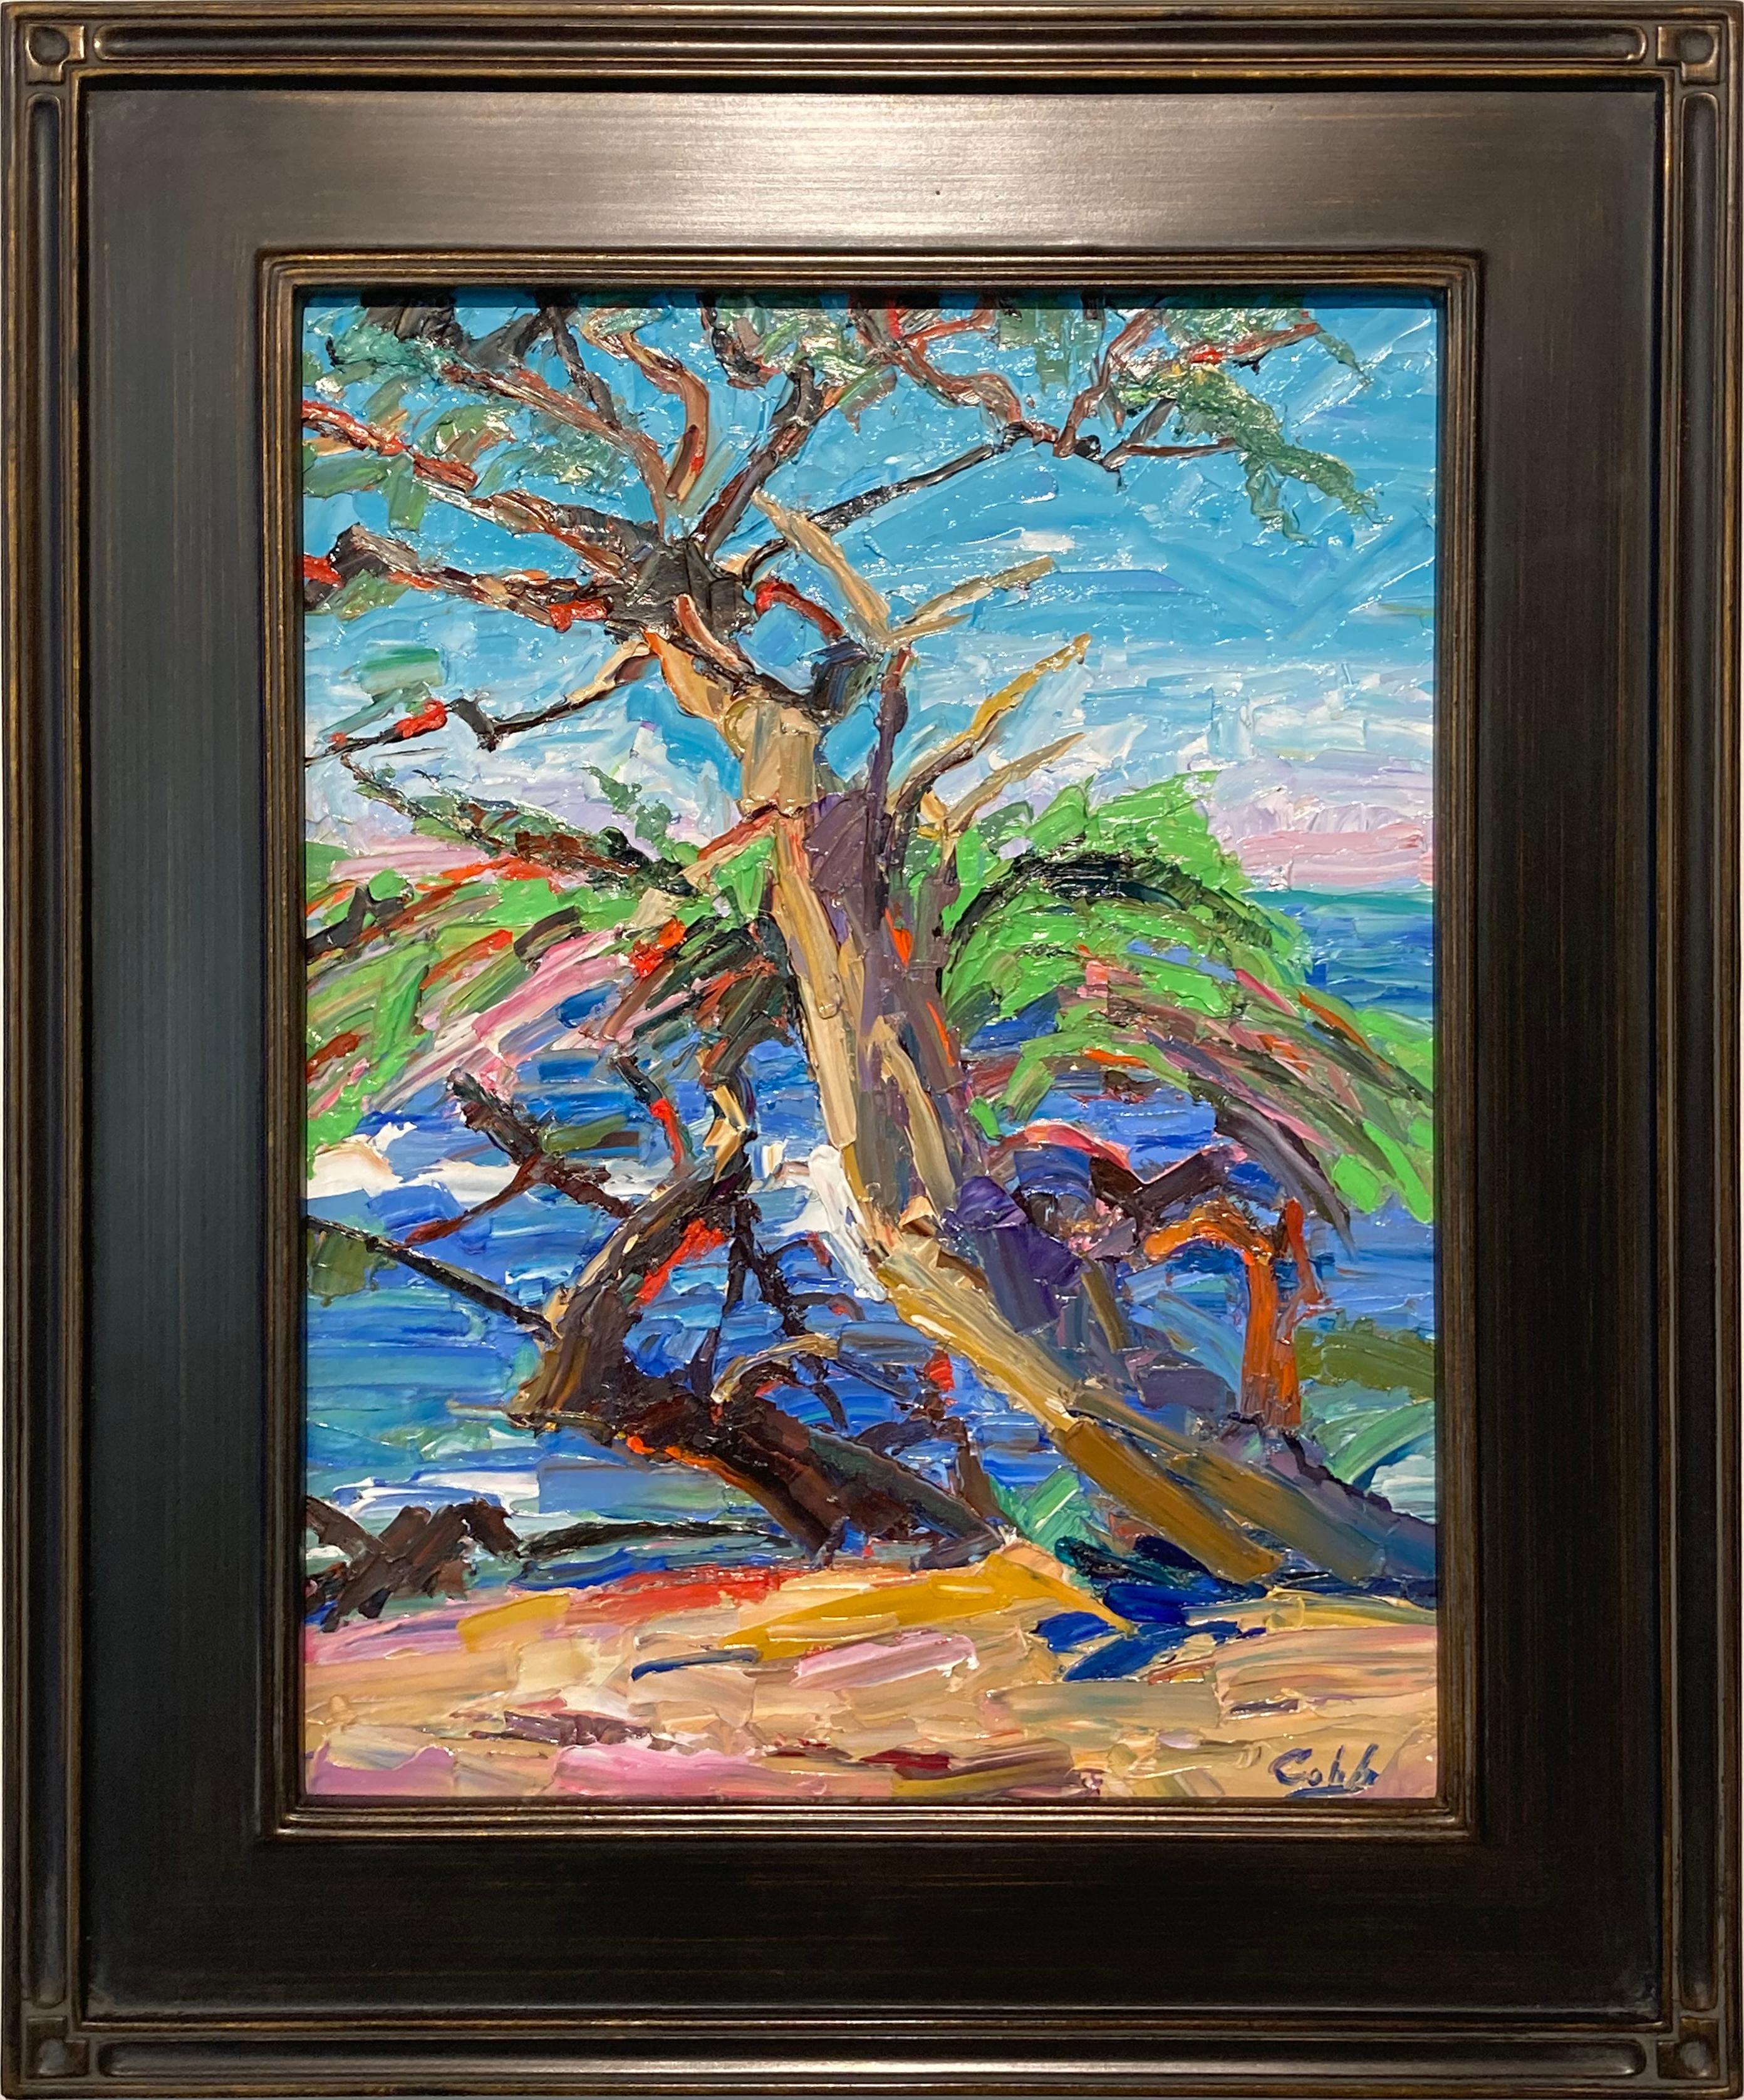 Jim Cobb Landscape Painting - 'Cypress Point, ' by James Cobb, Oil on Gesso Board Painting